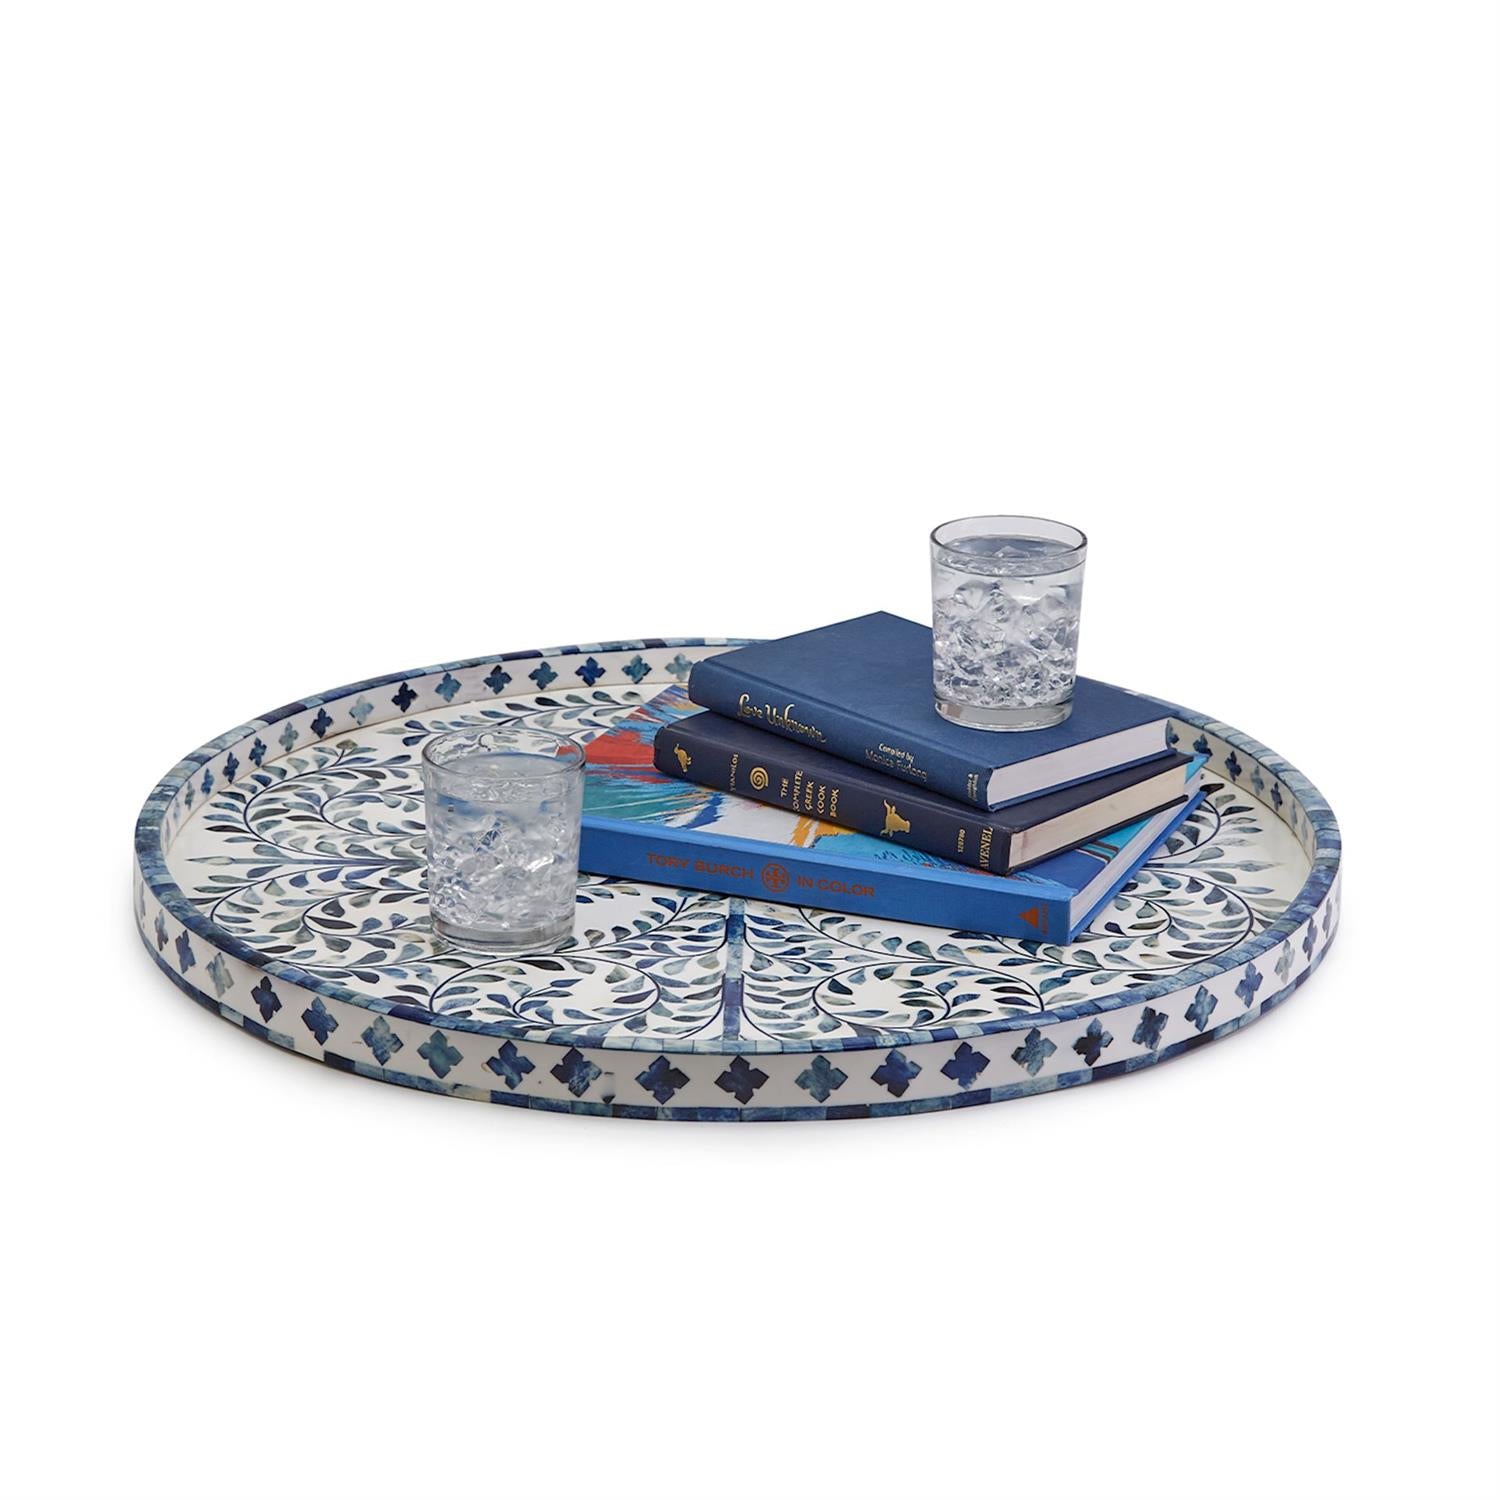 Two's Company Blue and White Inlaid Decorative Round Serving Tray